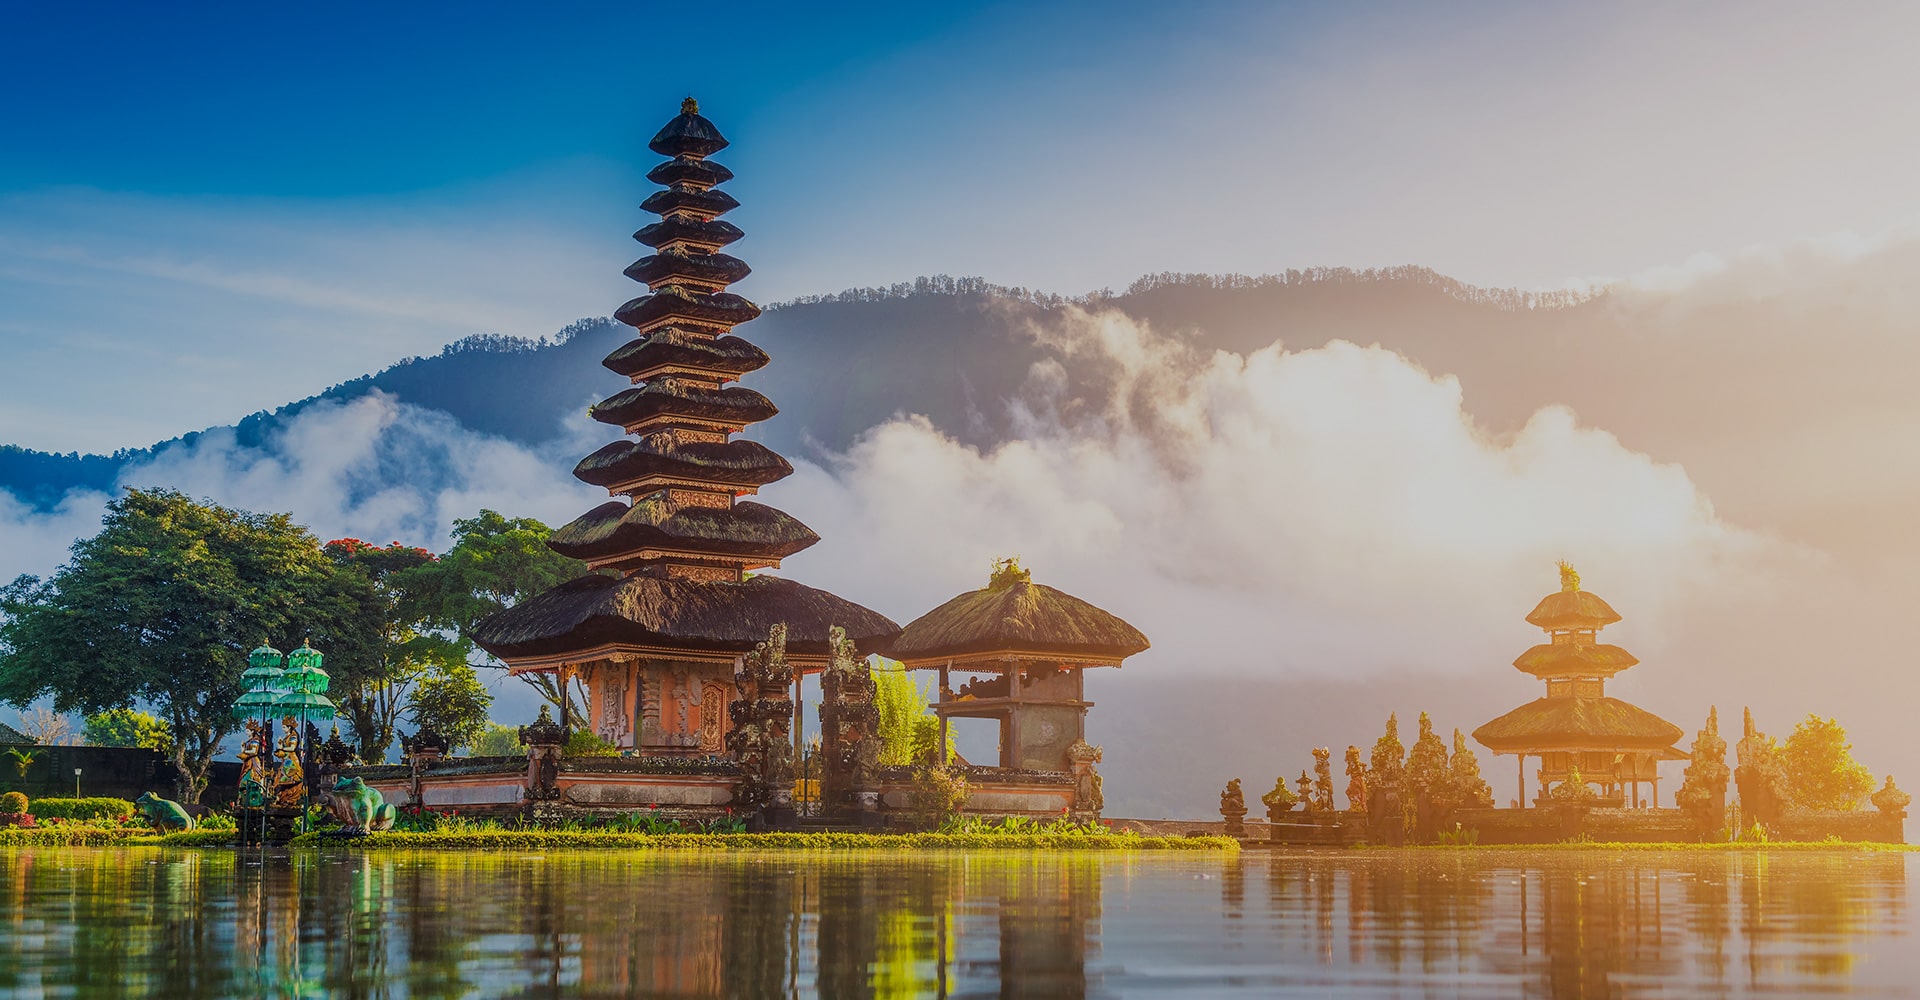 Towering Temples in Indonesia, Set Against a Backdrop of a Serene Lake and Majestic Mountains, Enveloped in Mystical Fog.